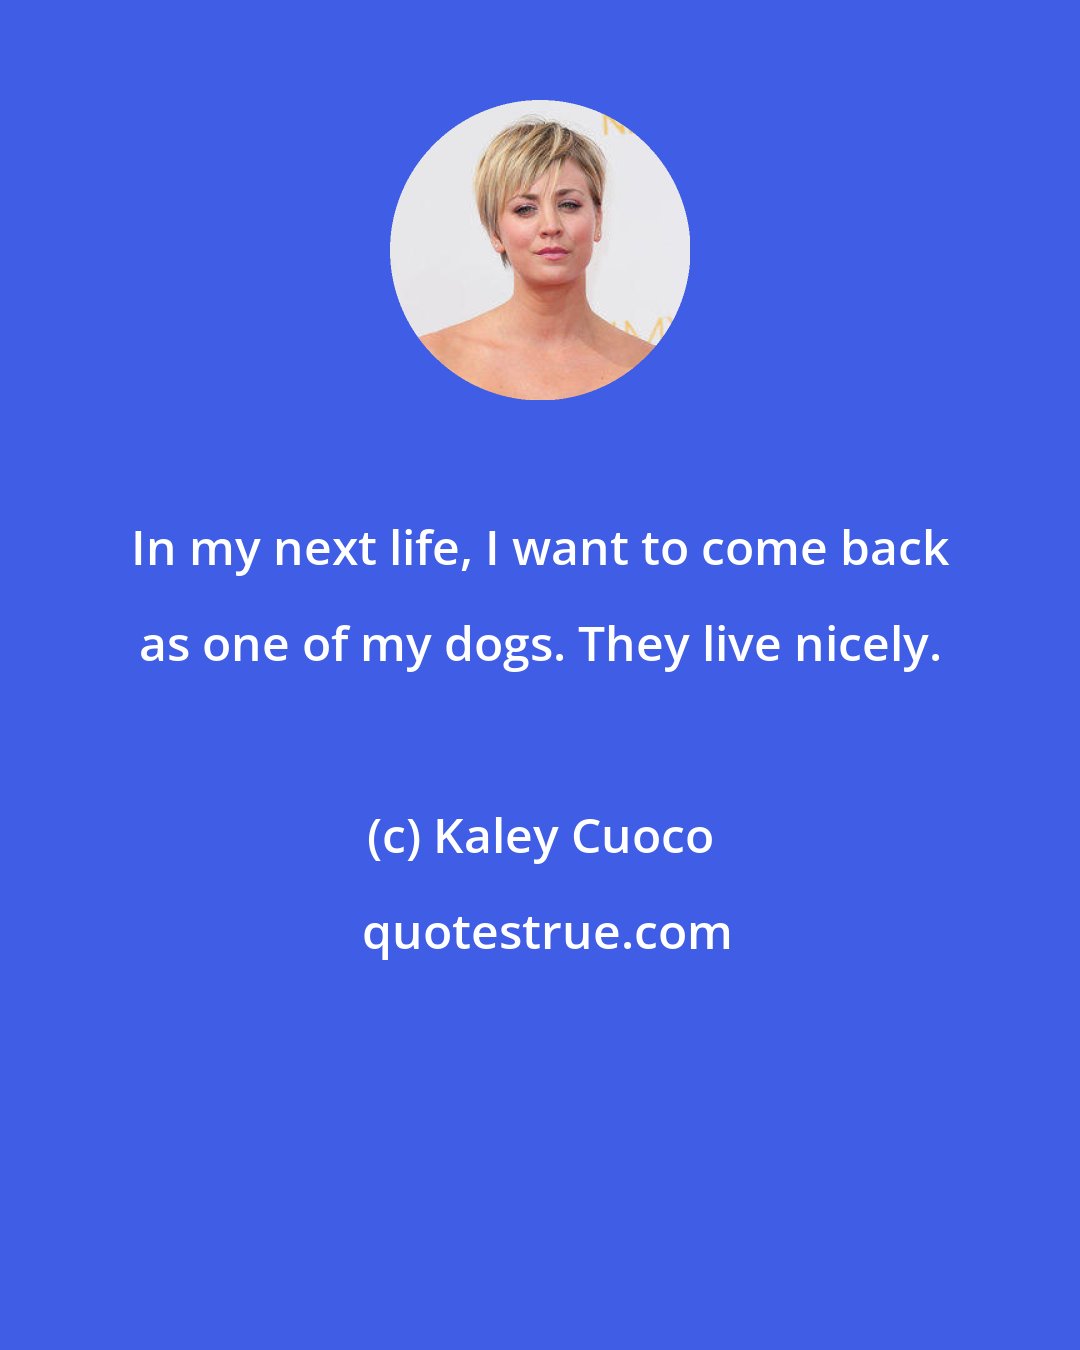 Kaley Cuoco: In my next life, I want to come back as one of my dogs. They live nicely.